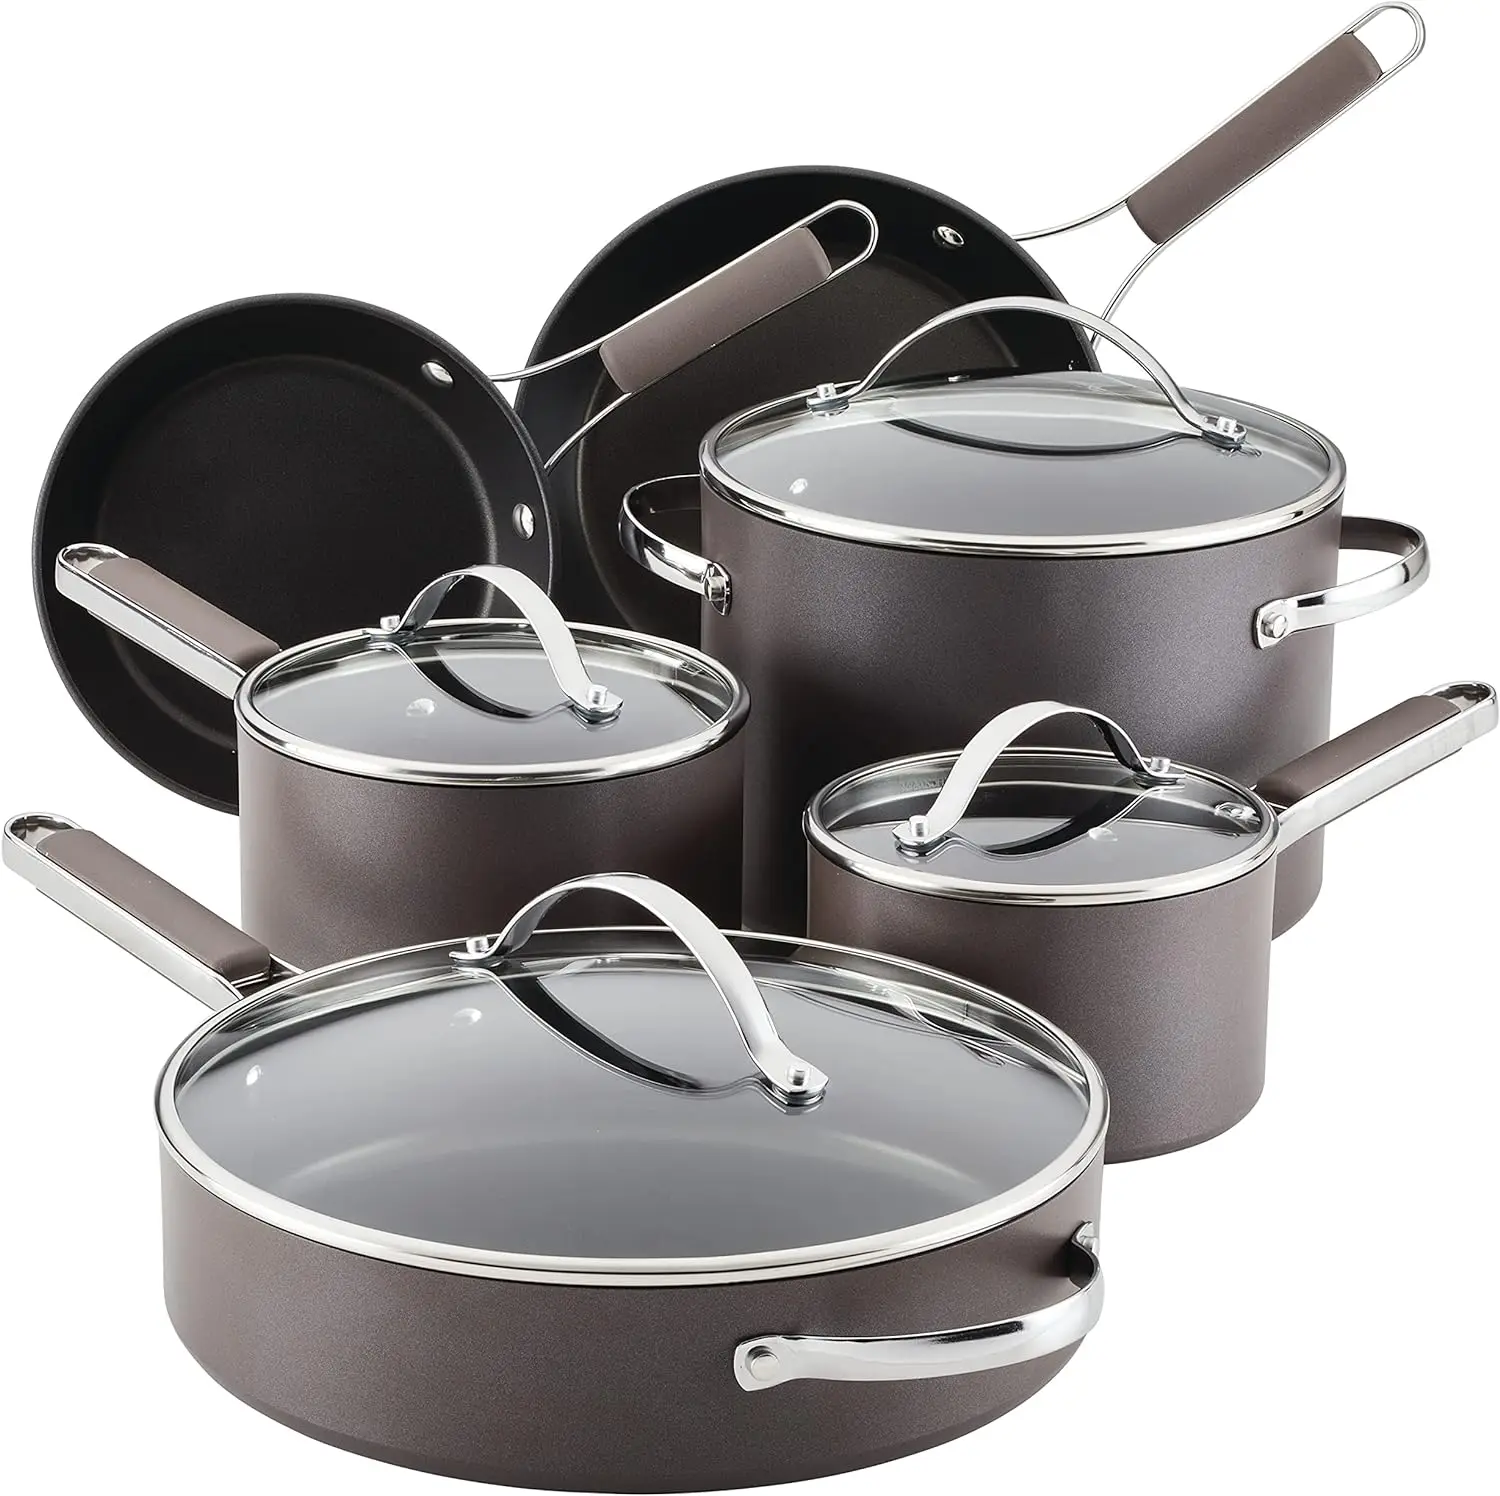 

Hard Anodized Nonstick Cookware Pots and Pans Set, 10 Piece, Charcoal